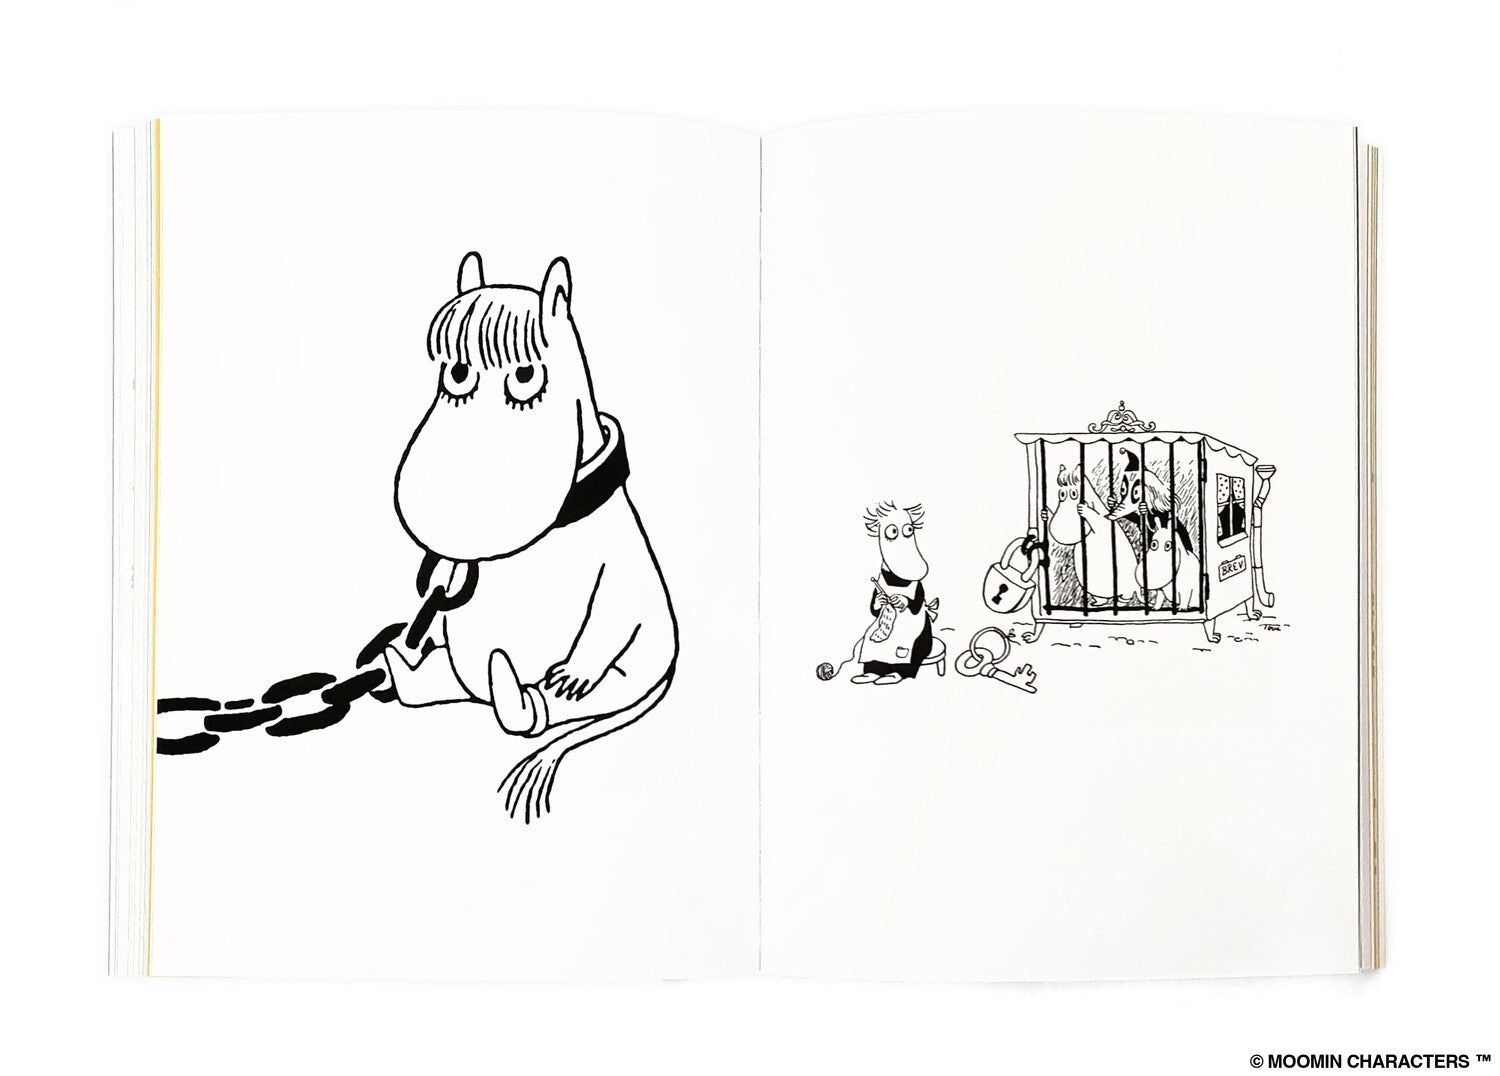 Moomin / Mischievous Nature Softcover